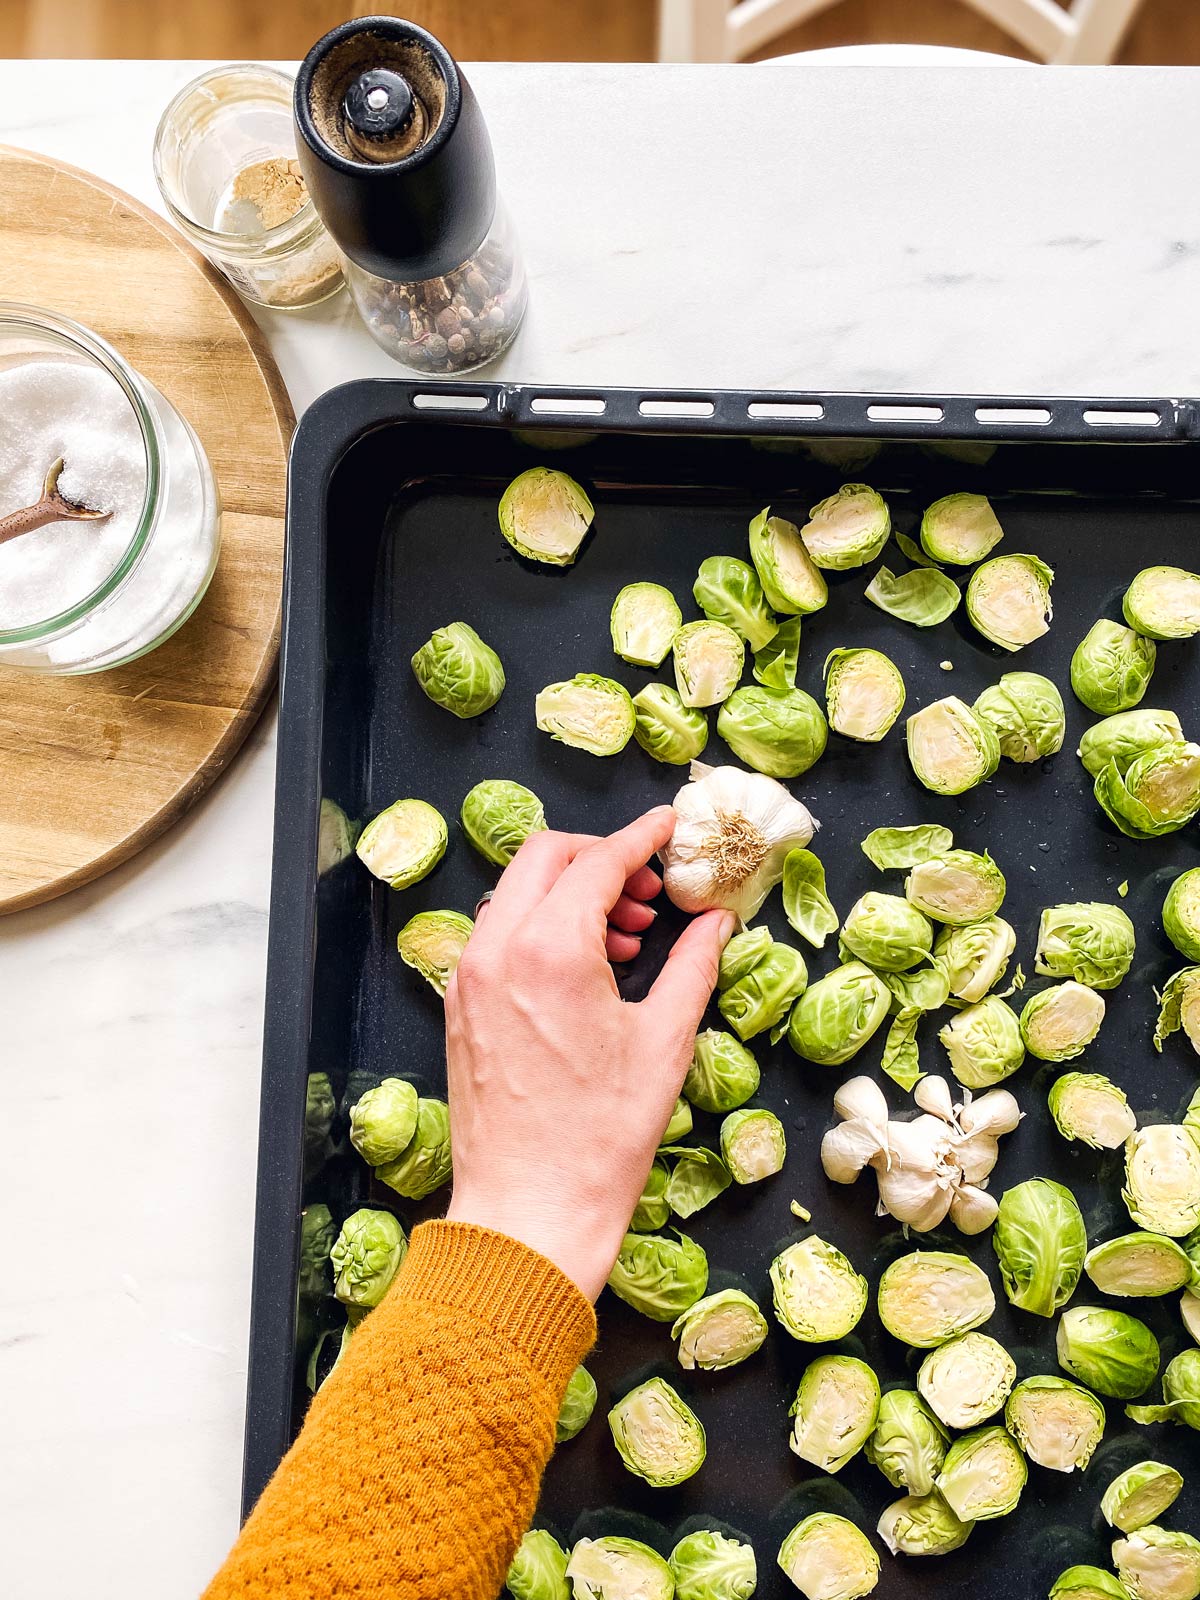 placing garlic on a pan with Brussels sprouts